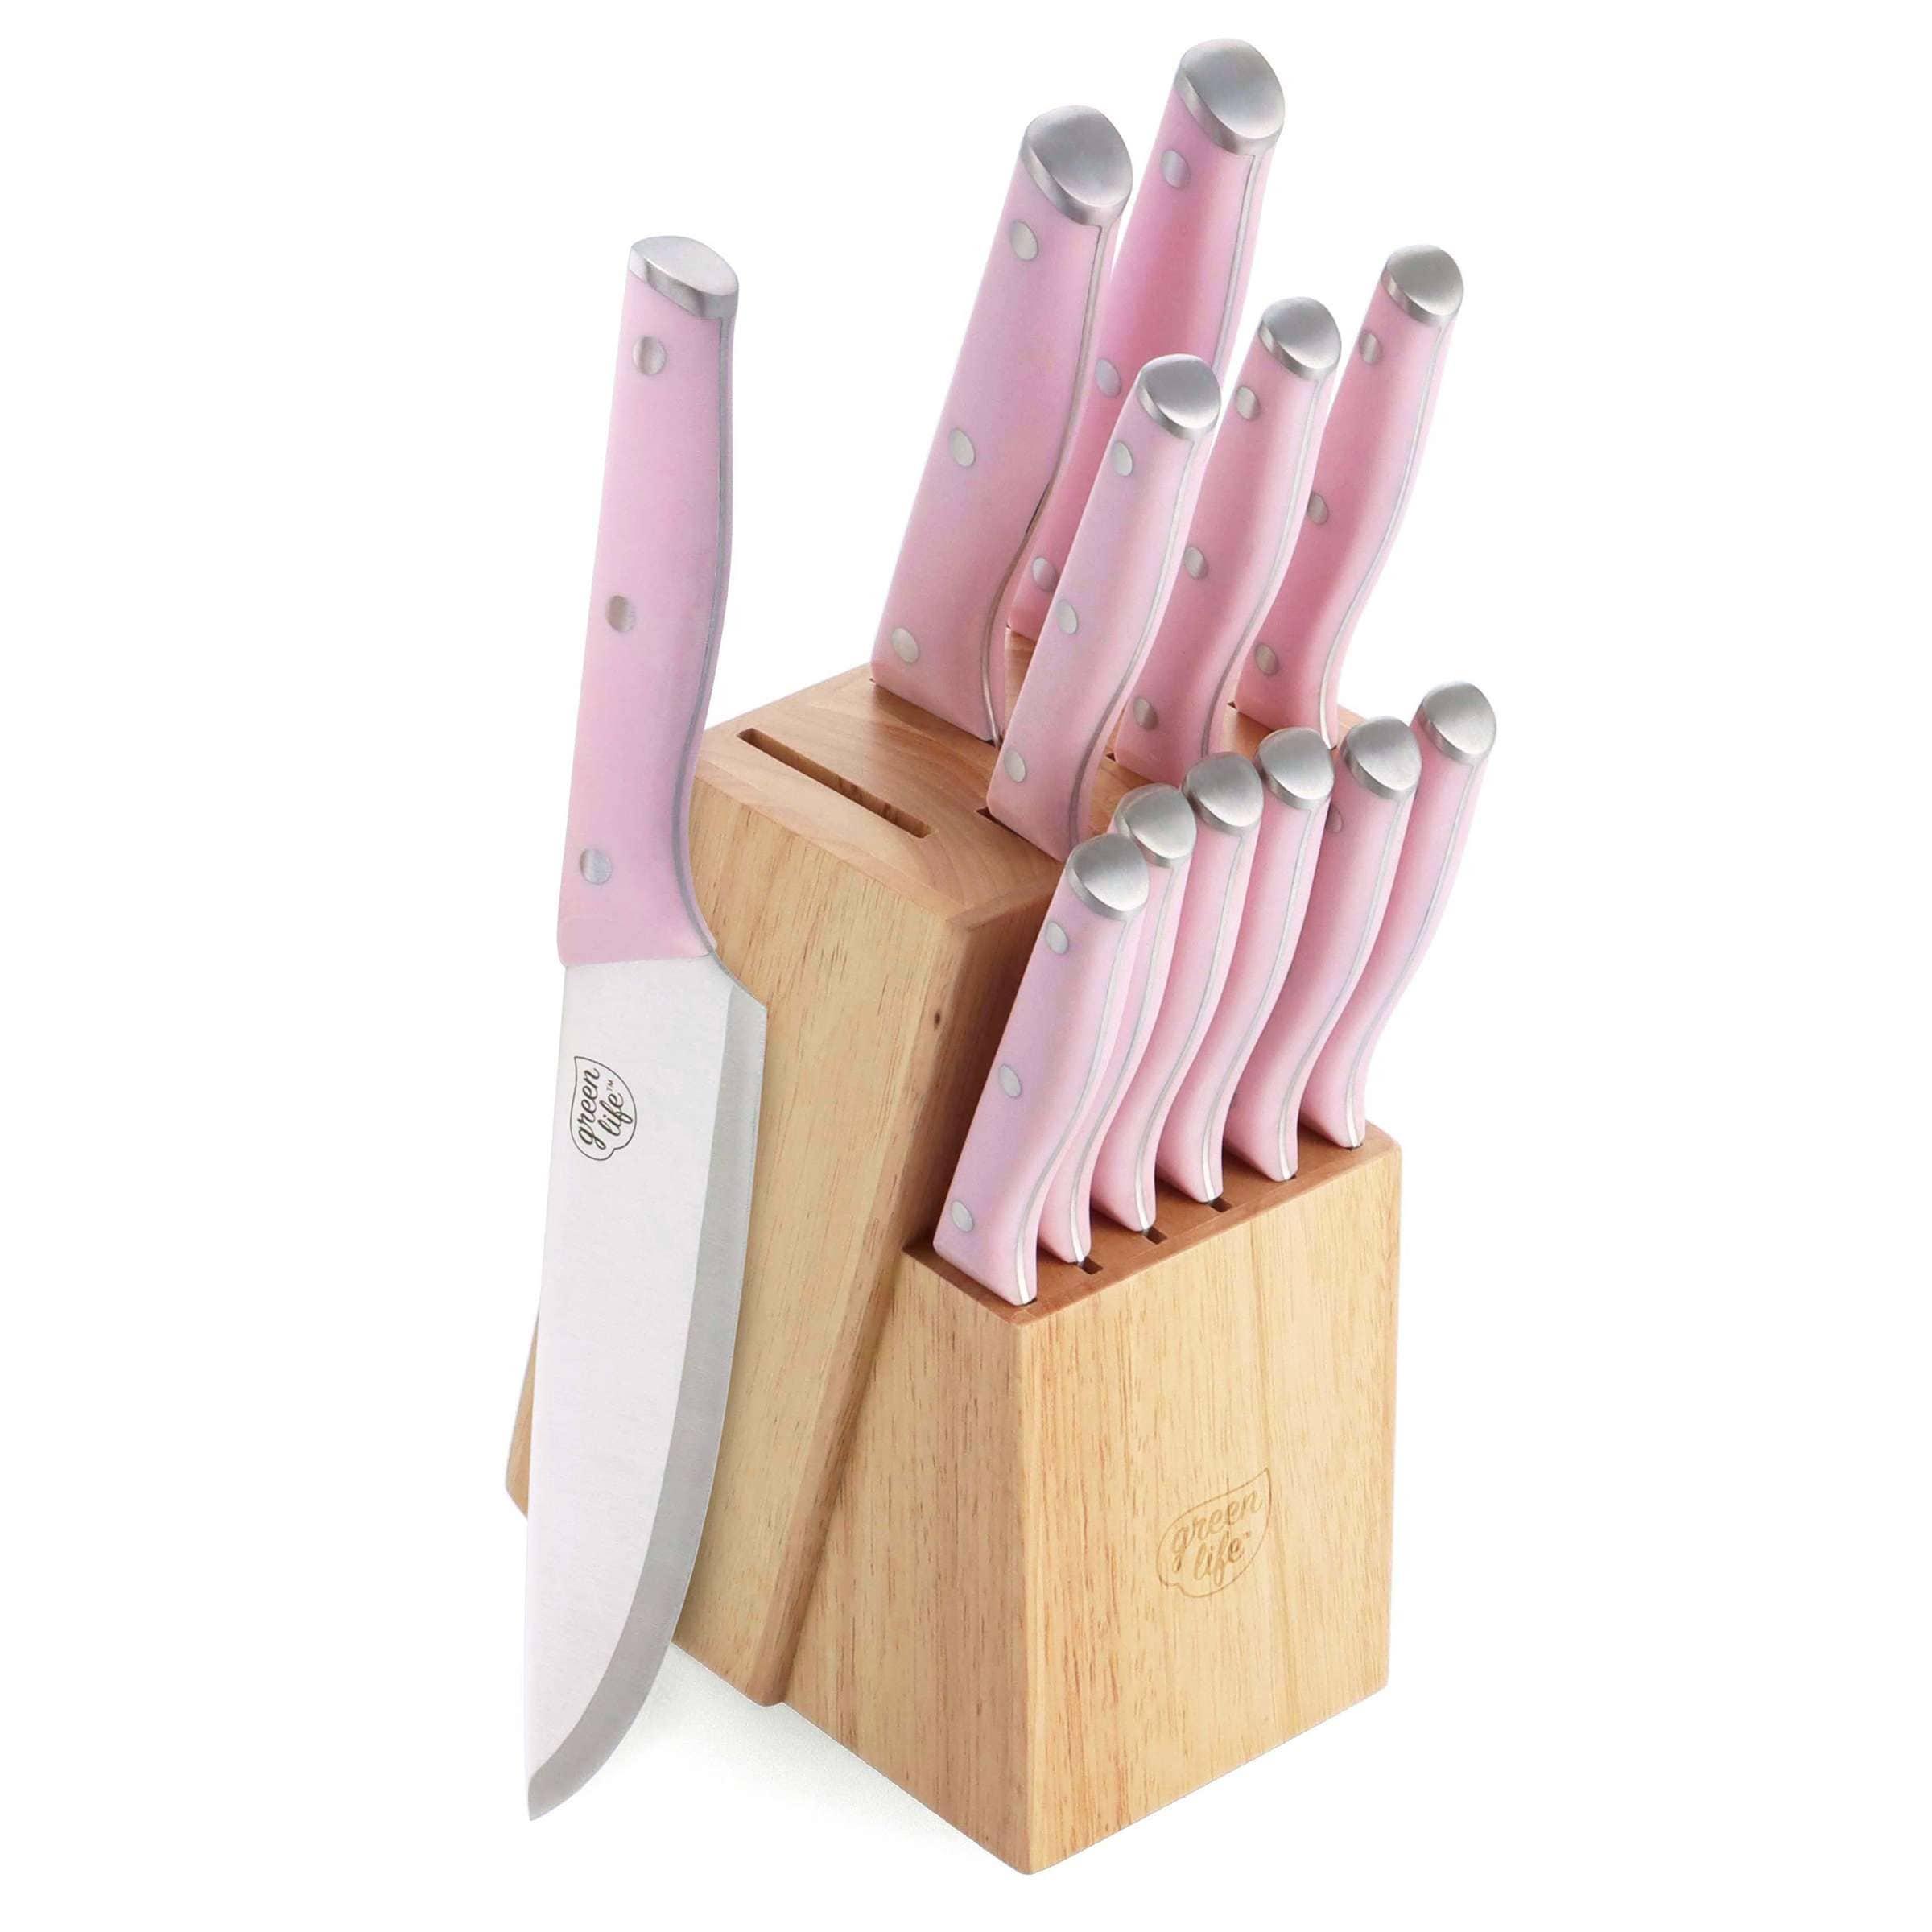 Graphix Collection 13 Piece Stainless Steel Cutlery Block Set (C77SS-13P) 